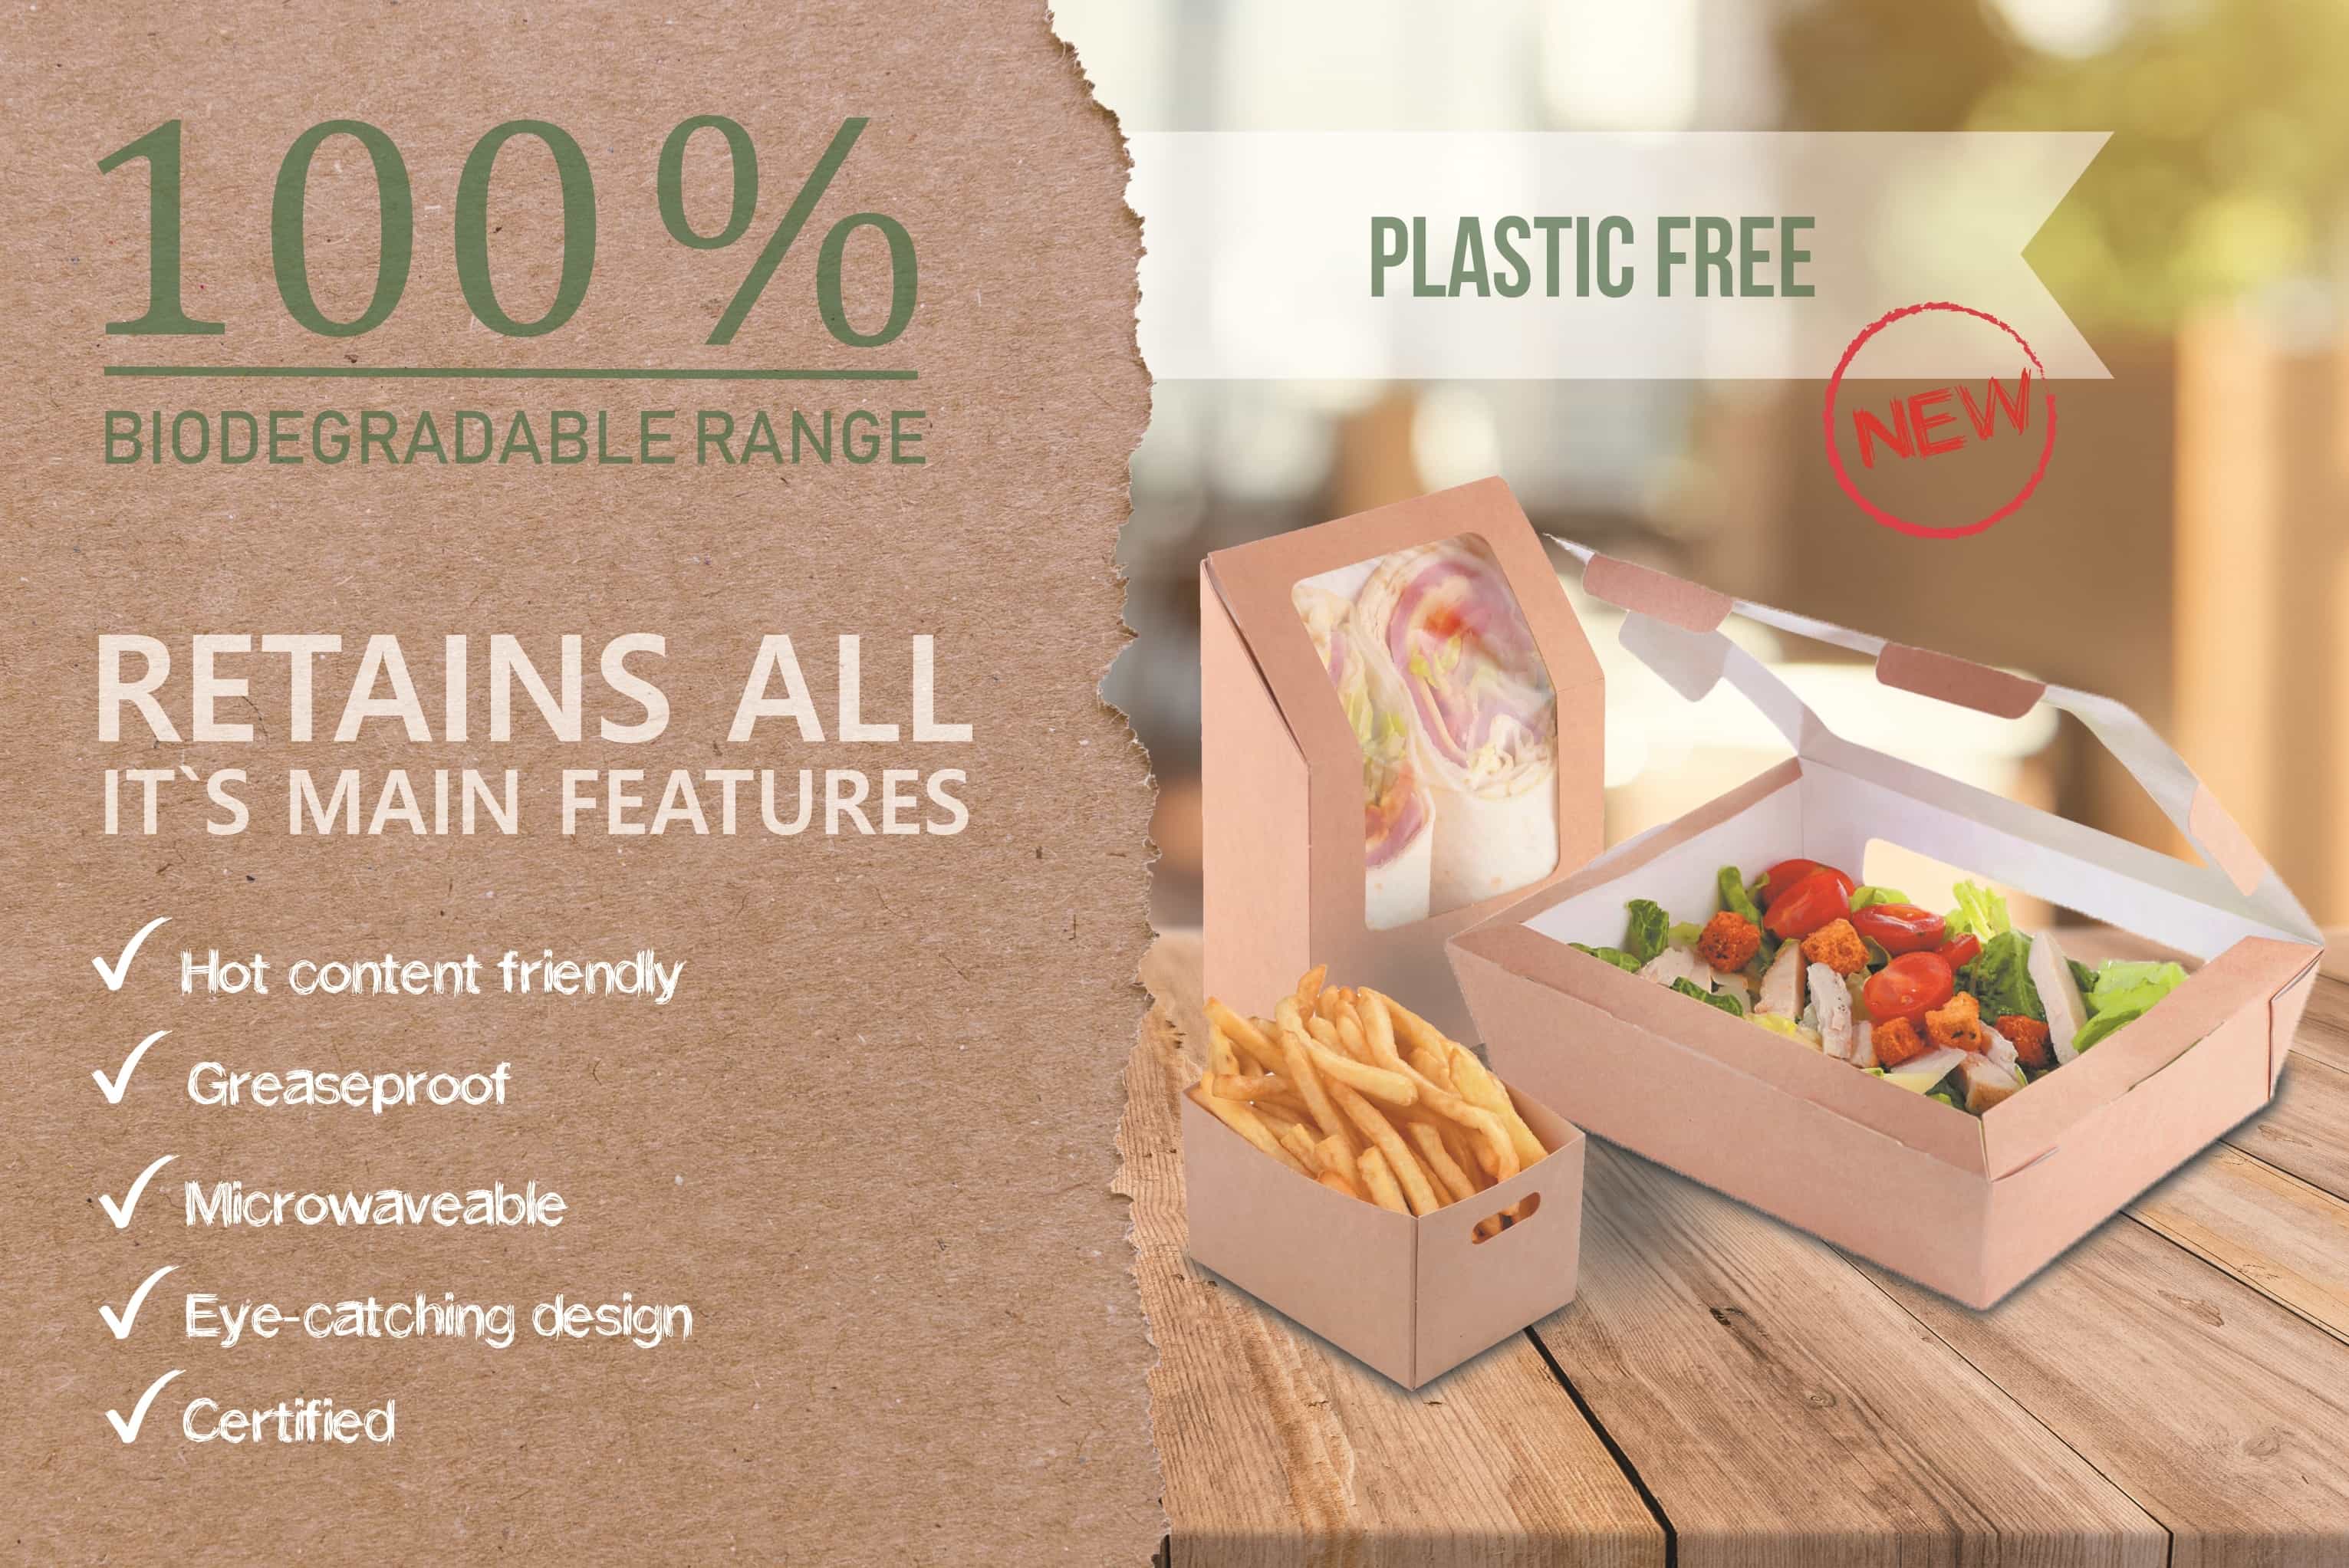 OSQ Launches Fully Biodegradable Range to Meet Takeout and HoReCA Needs